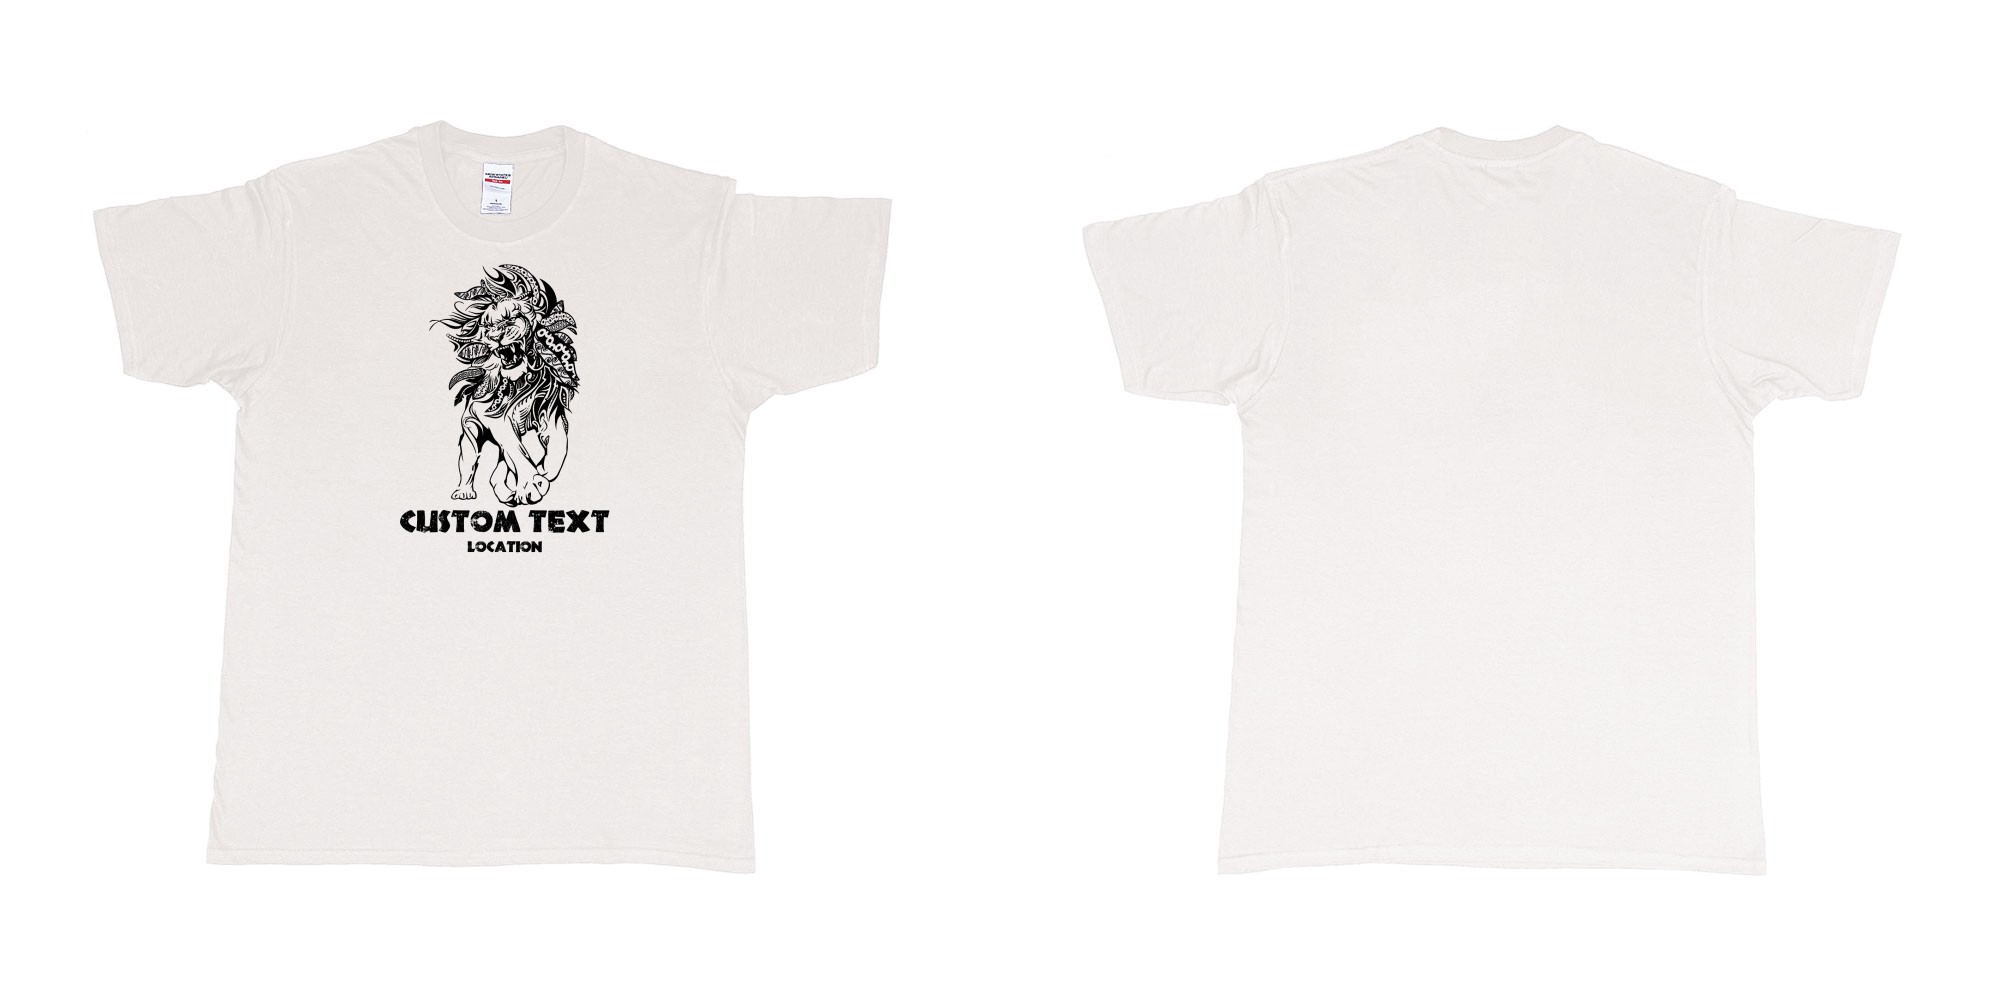 Custom tshirt design lion august tribal in fabric color white choice your own text made in Bali by The Pirate Way